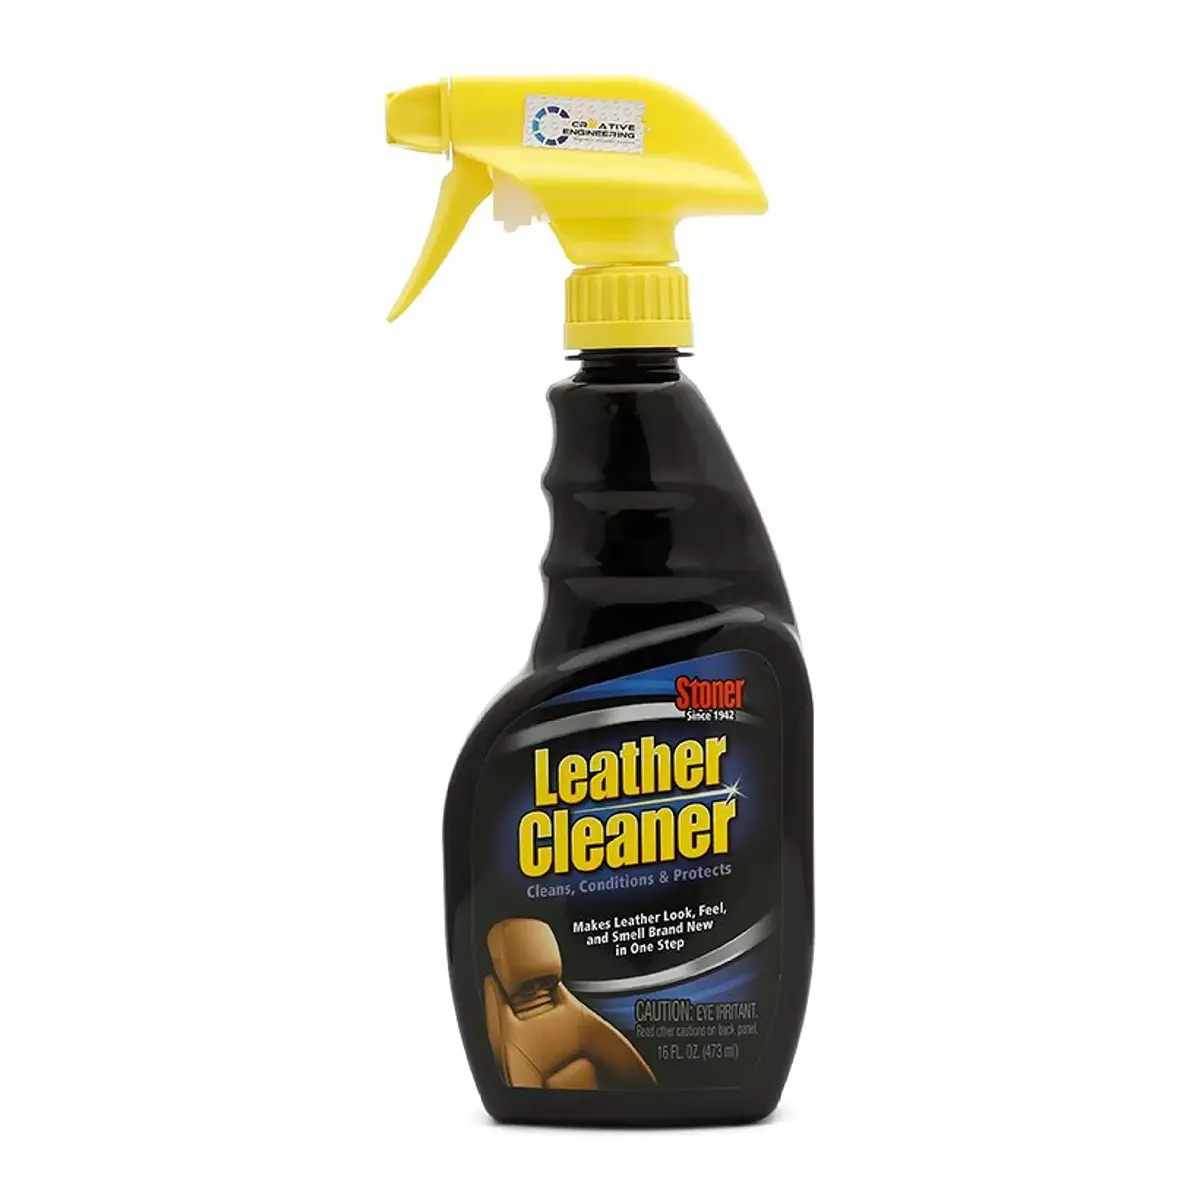 dung-dich-lau-va-duong-be-mat-da-stoner-leather-cleaner-95400